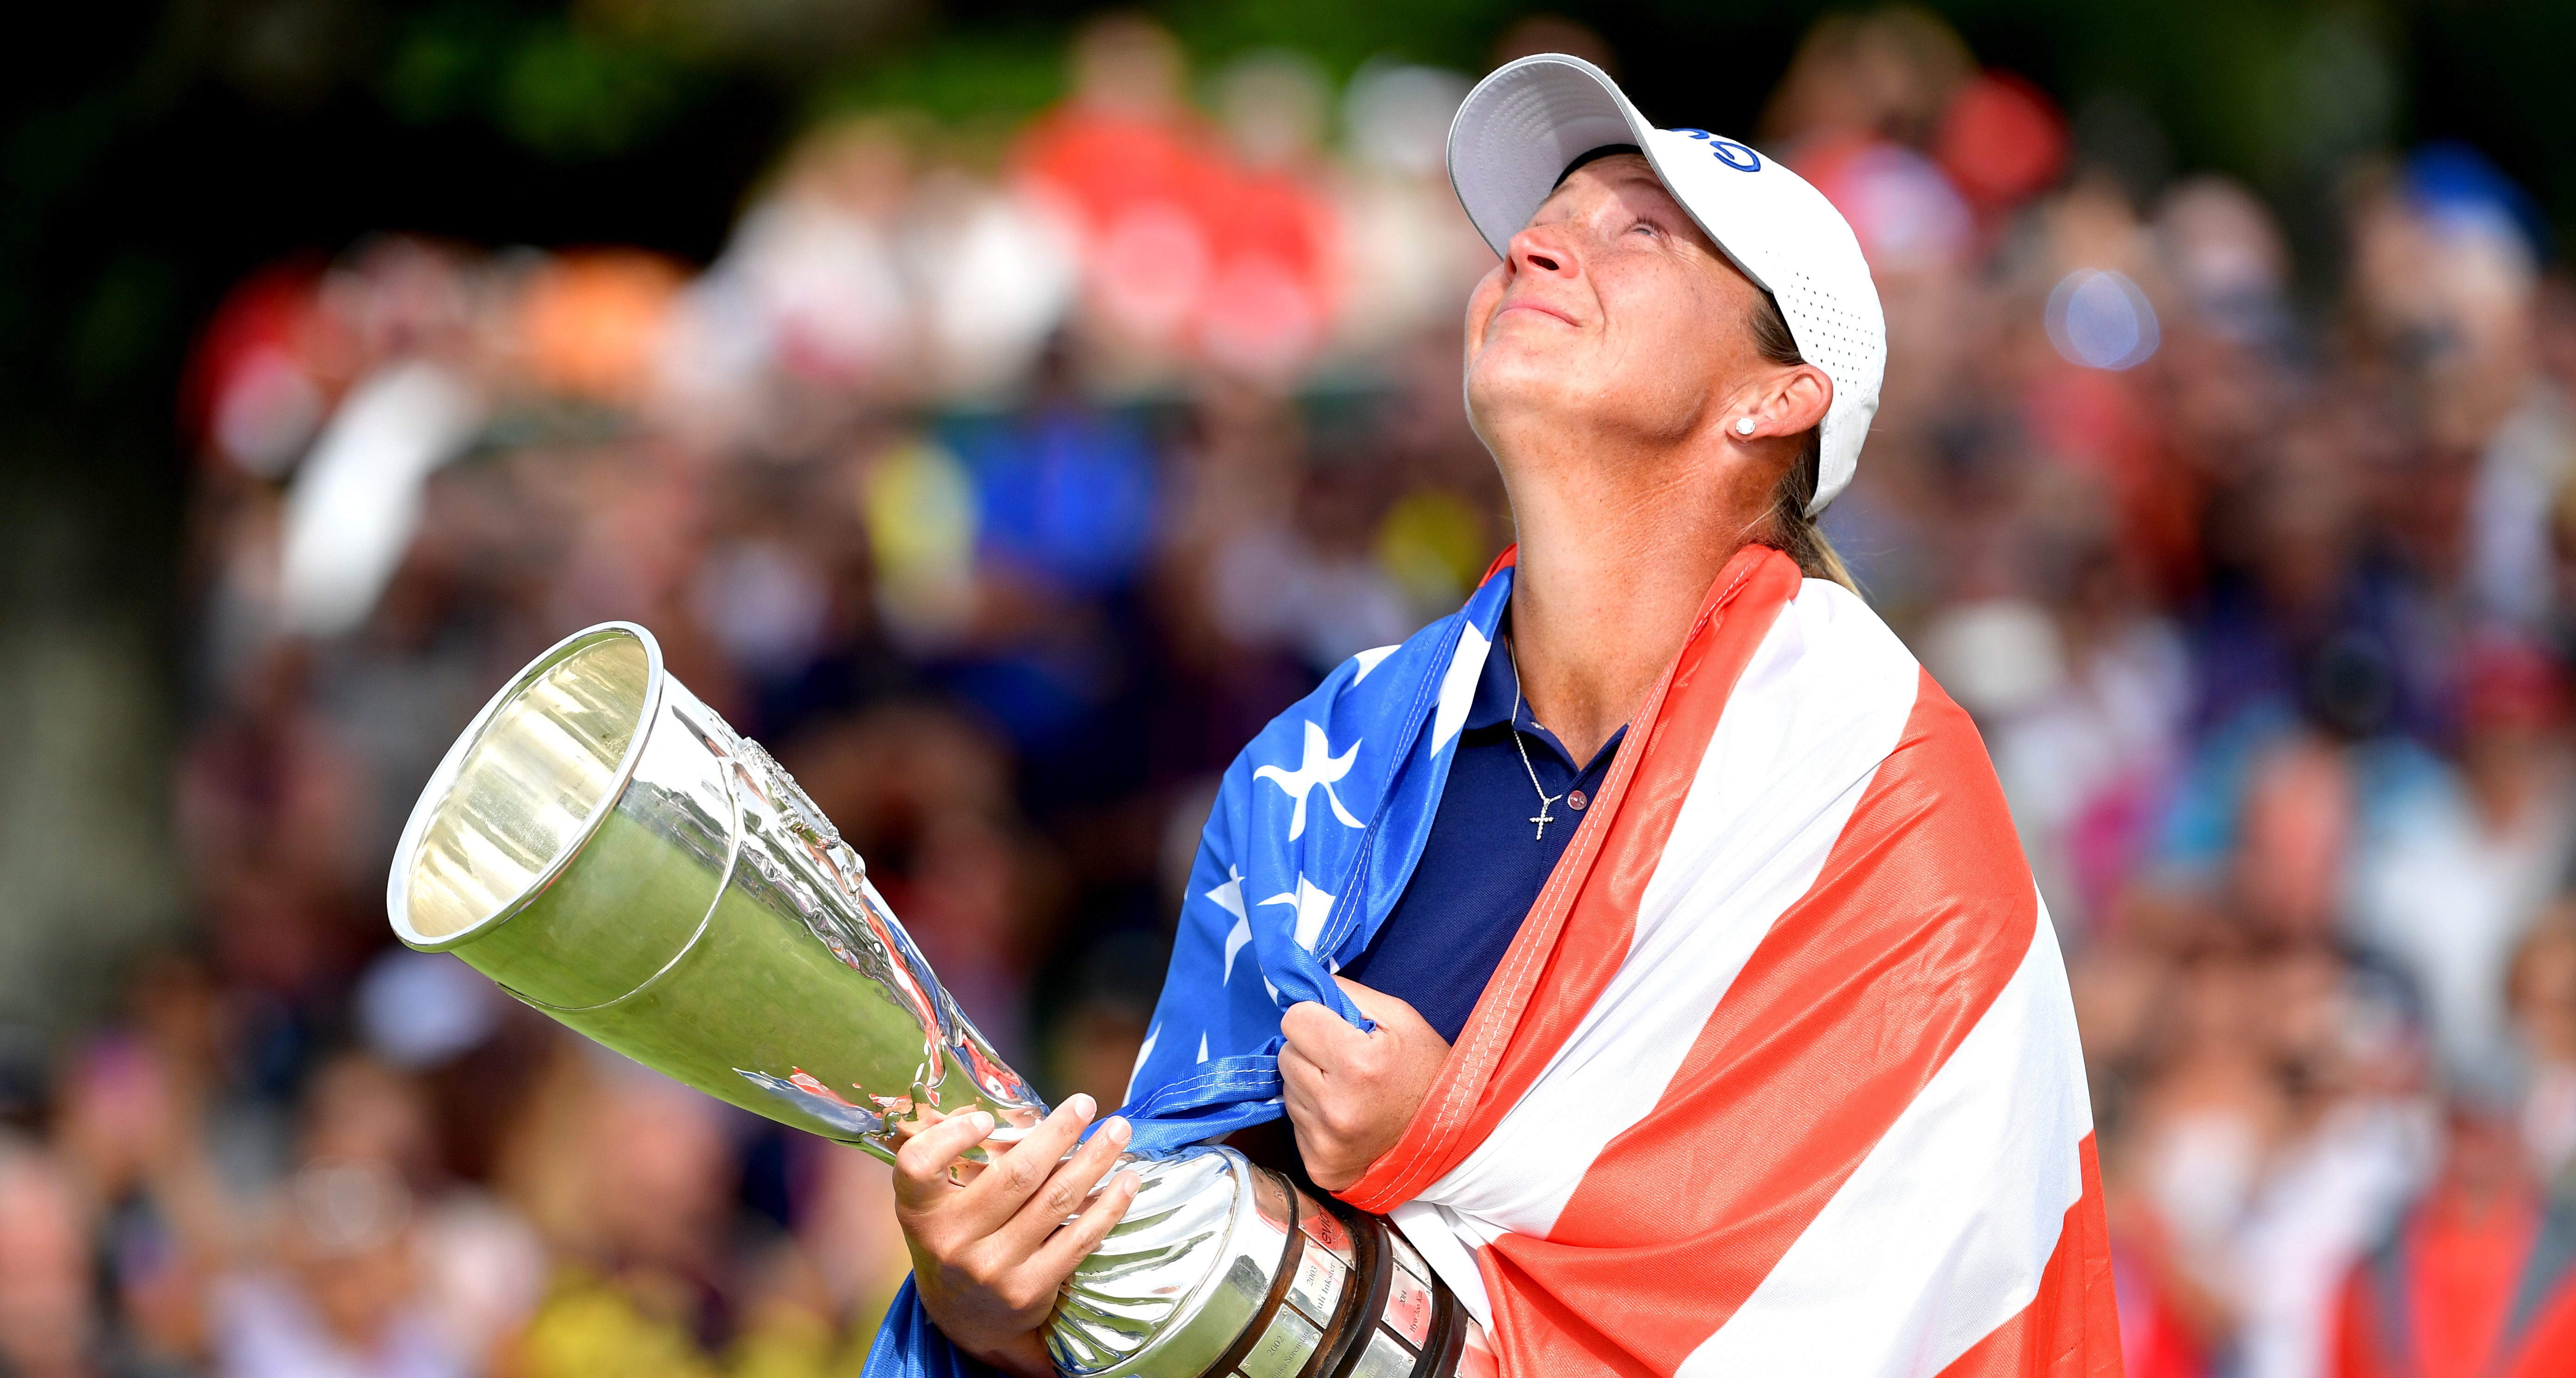 EVIAN-LES-BAINS, FRANCE - SEPTEMBER 16: Angela Stanford of the United States celebrates winning the Evian Championship with the trophy during Day Four of The Evian Championship 2018 at Evian Resort Golf Club on September 16, 2018 in Evian-les-Bains, France. (Photo by Stuart Franklin/Getty Images)